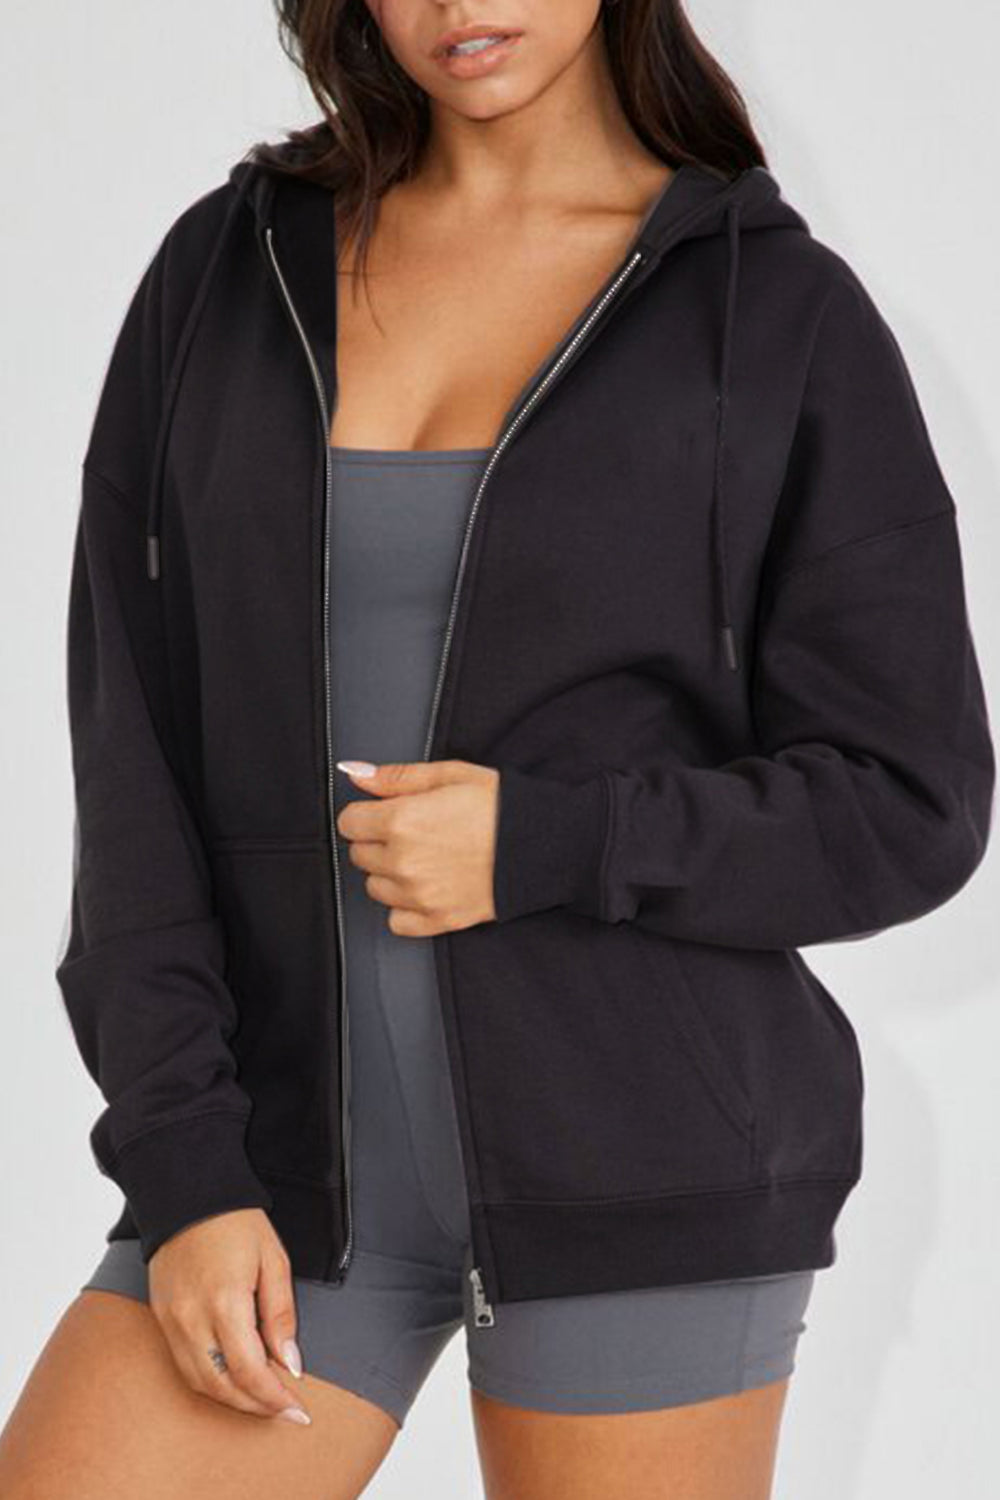 Sun Graphic Hooded Jacket - Women’s Clothing & Accessories - Shirts & Tops - 9 - 2024